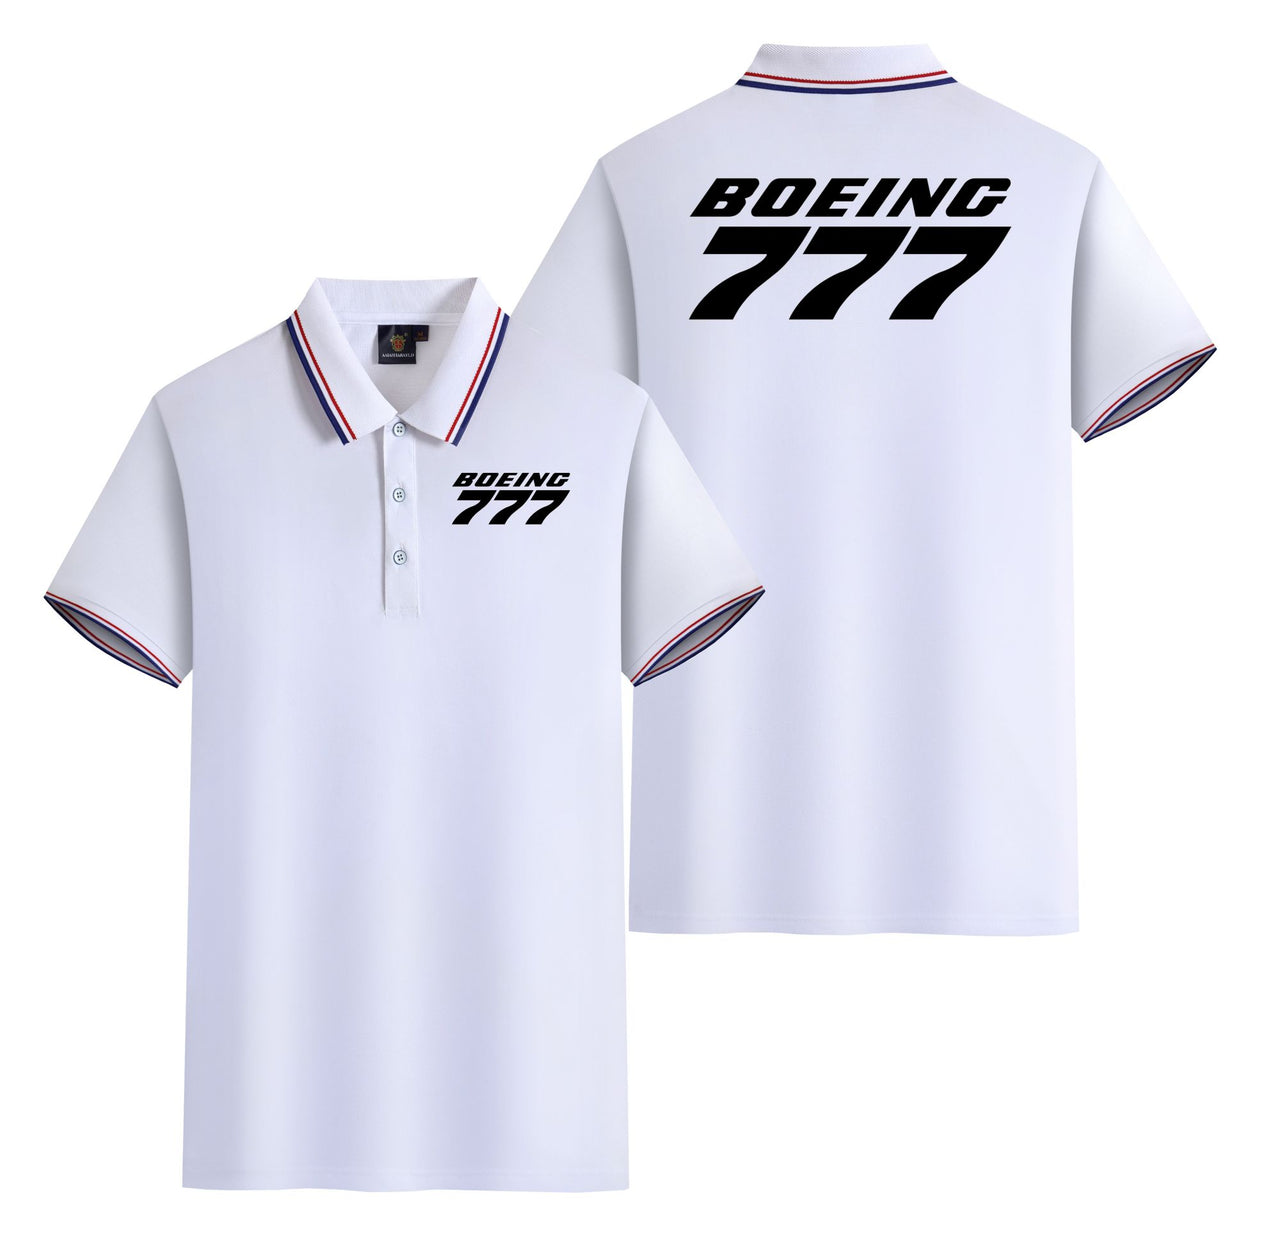 Boeing 777 & Text Designed Stylish Polo T-Shirts (Double-Side)